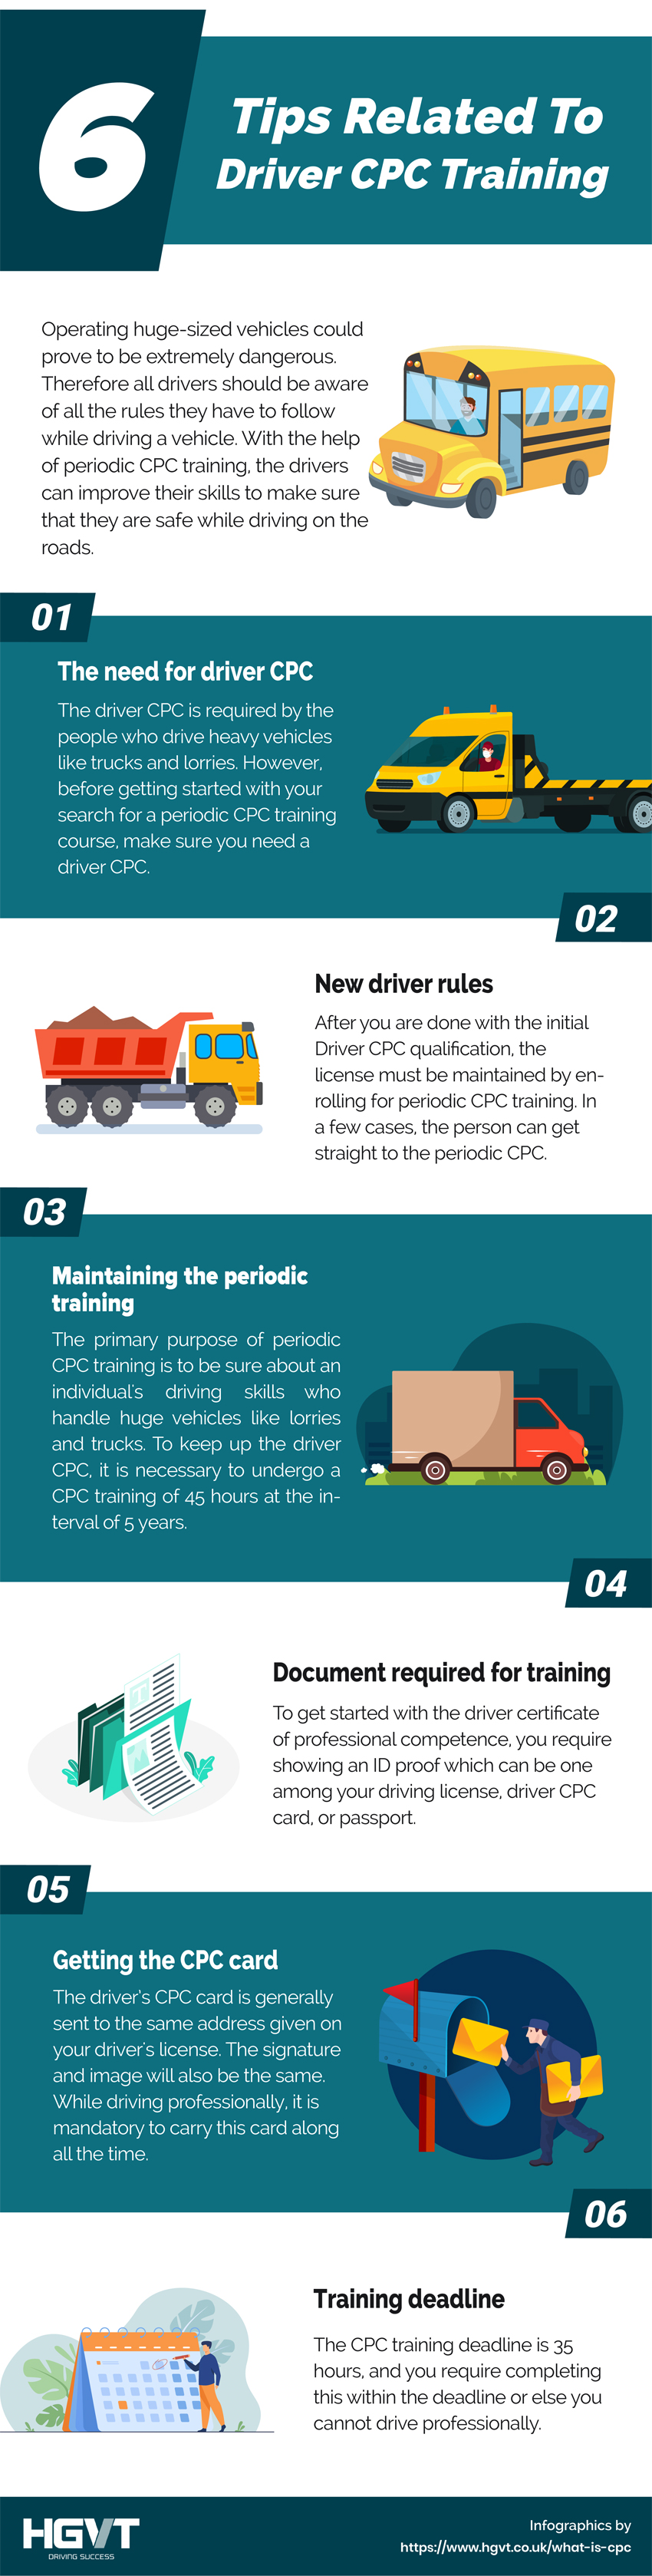 06 Tips Related To Driver CPC Training